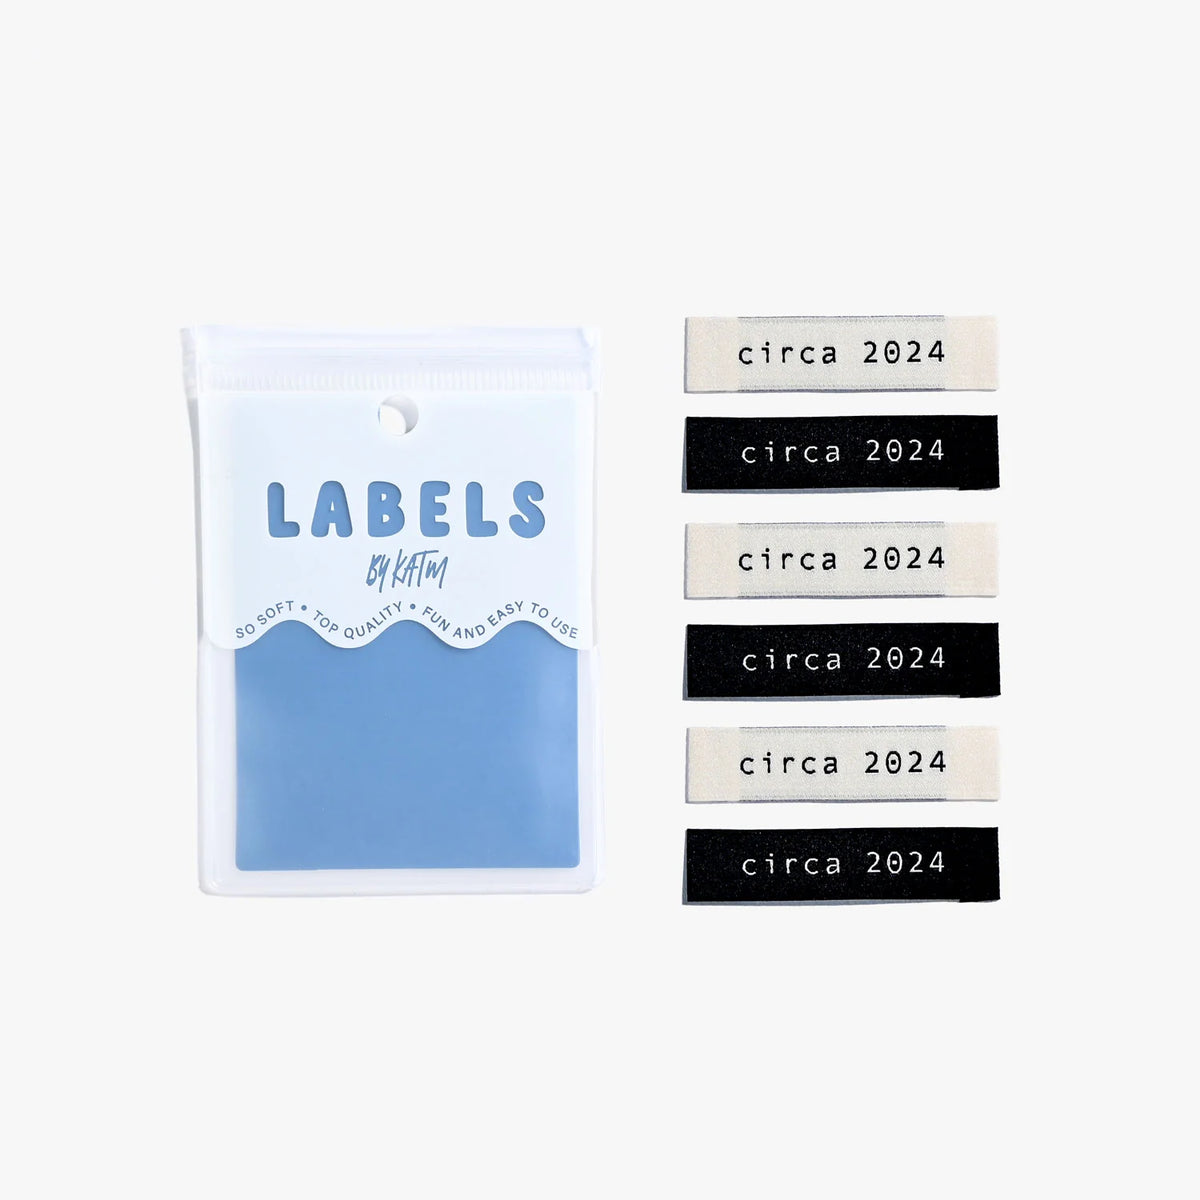 CIRCA 2024 - Pack of 6 Woven Sew-In Labels